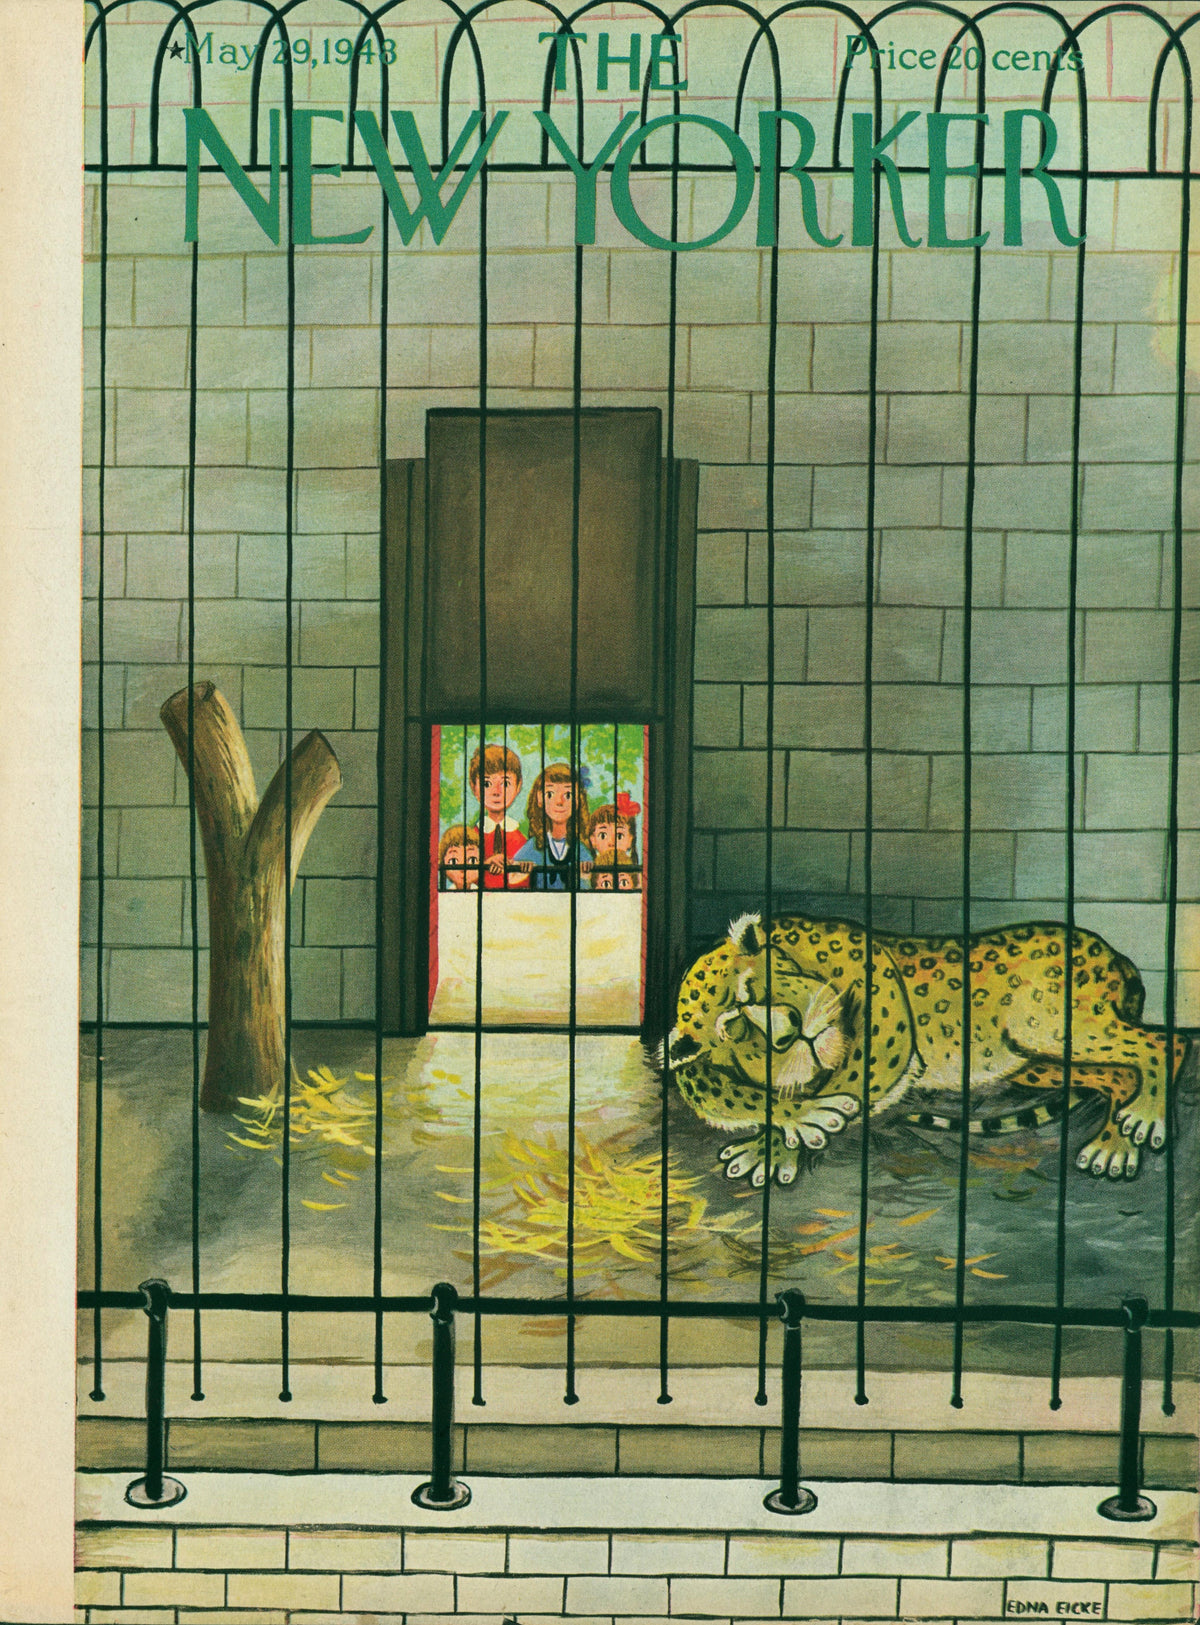 Bronx Zoo- The New Yorker - Authentic Vintage Antique Print